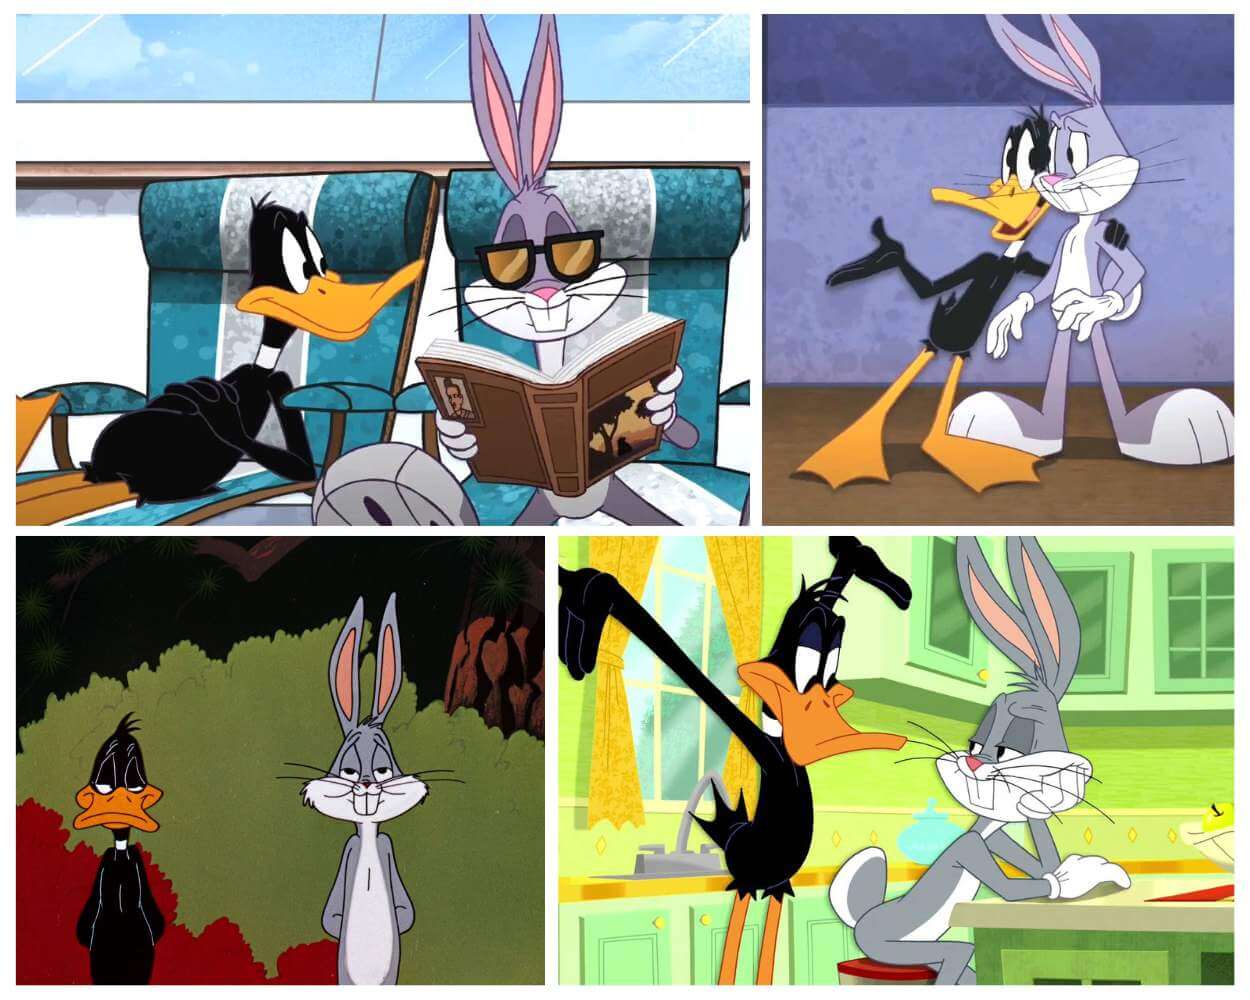 Bugs Bunny and Daffy Duck - Friends or Foe